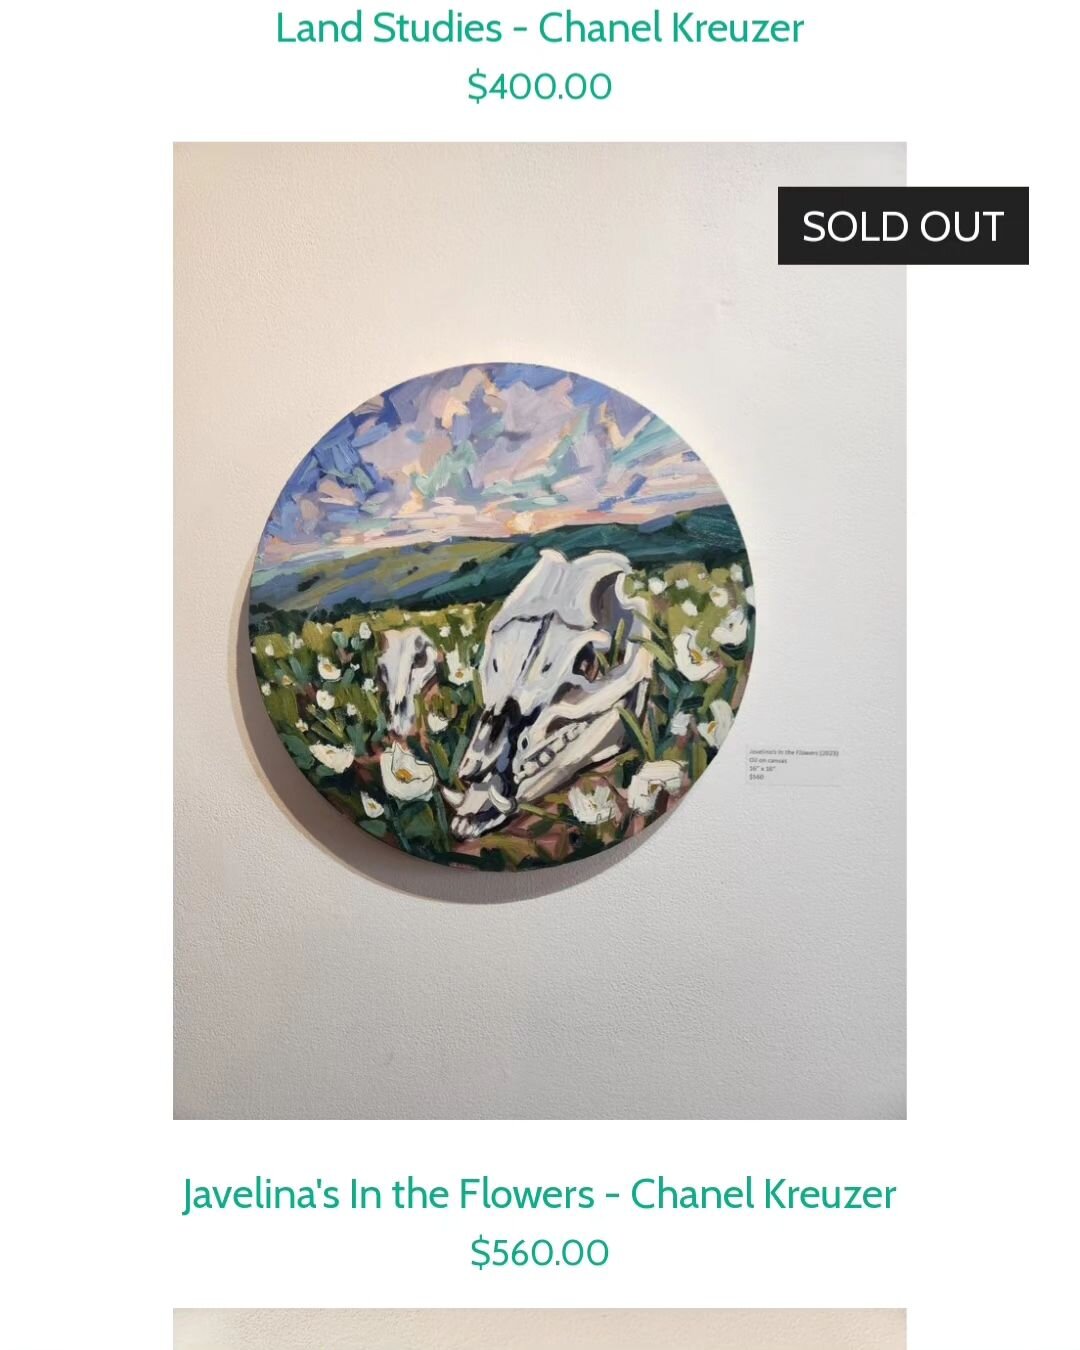 There's still time to check out &quot;Yo Soy la Tierra&quot; in person or in our online store. Don't sleep on it though! Plenty of amazing pieces still available from up and coming artist @chanelkreuzer_art
Up through April 30
Mon-Sat 12-5